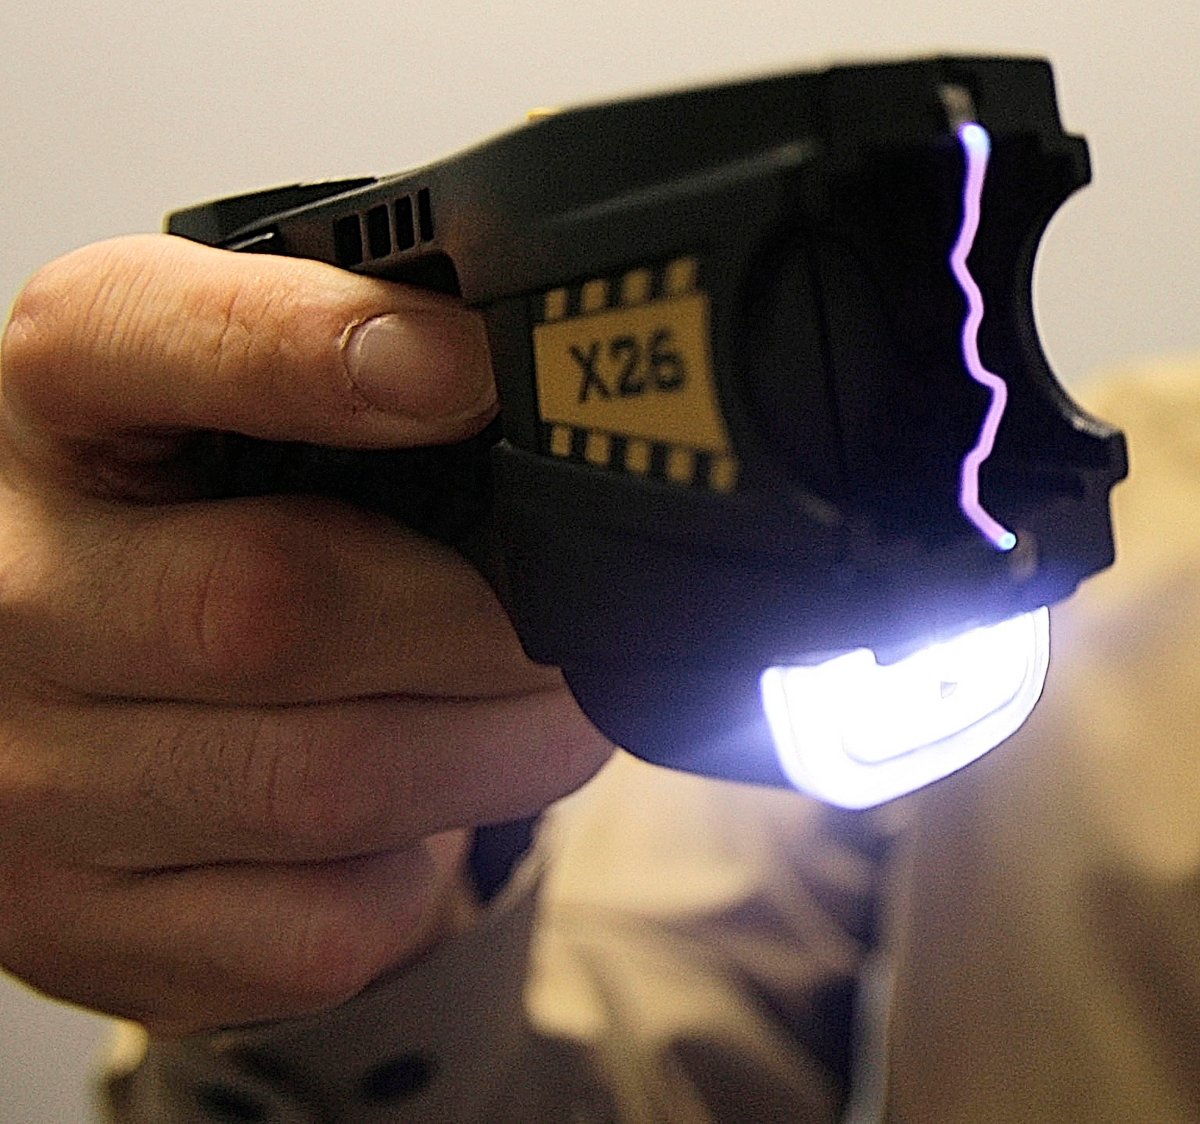 Peterborough police say officers used a stun gun to subdue a suspect on Sunday.